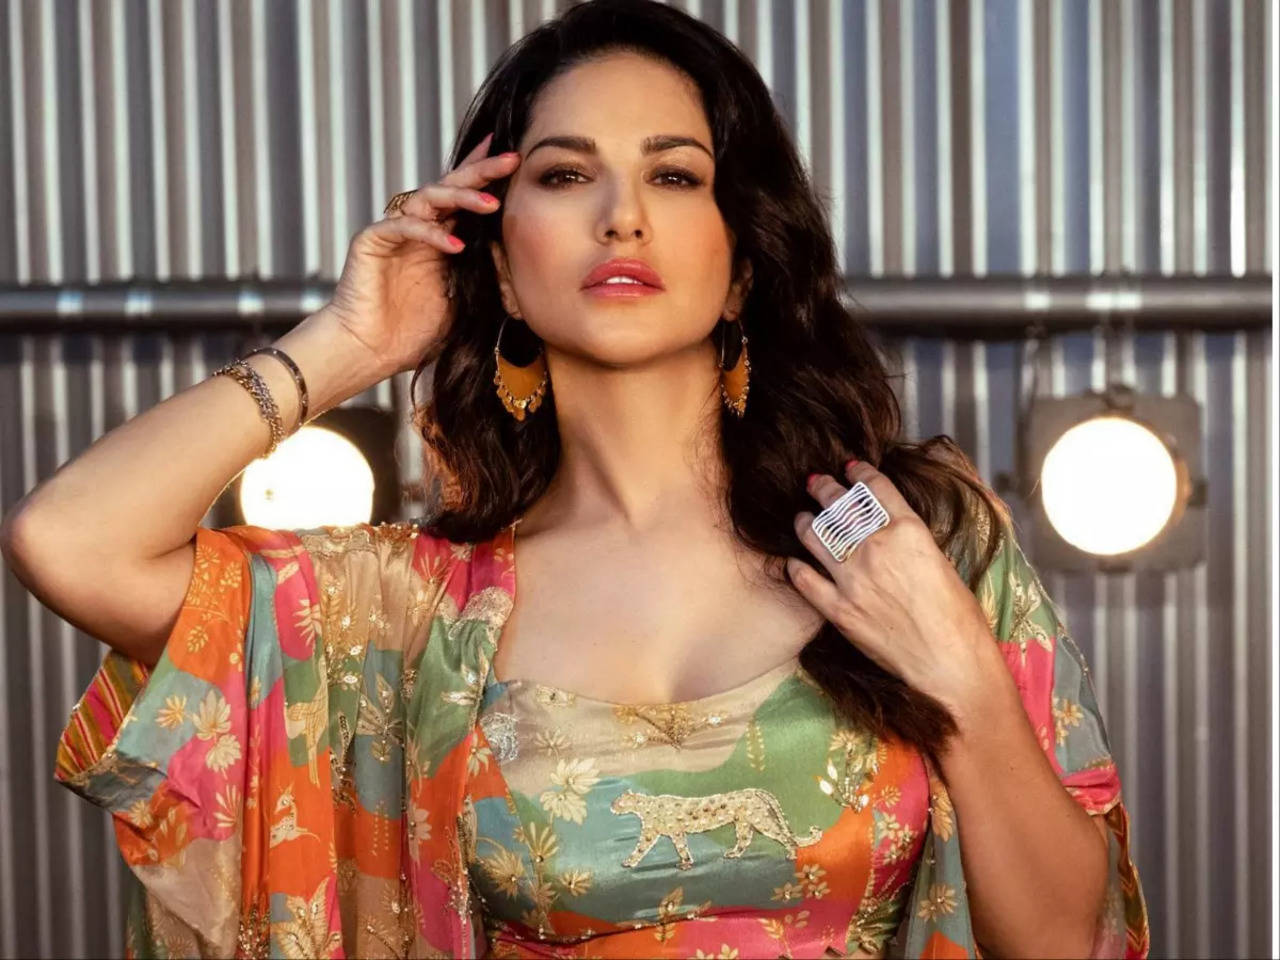 Xxx Sanilione Aur Burj Khalifa Old Videos - Sunny Leone: I can't believe from where I started in Bollywood to where I  am today | Hindi Movie News - Times of India